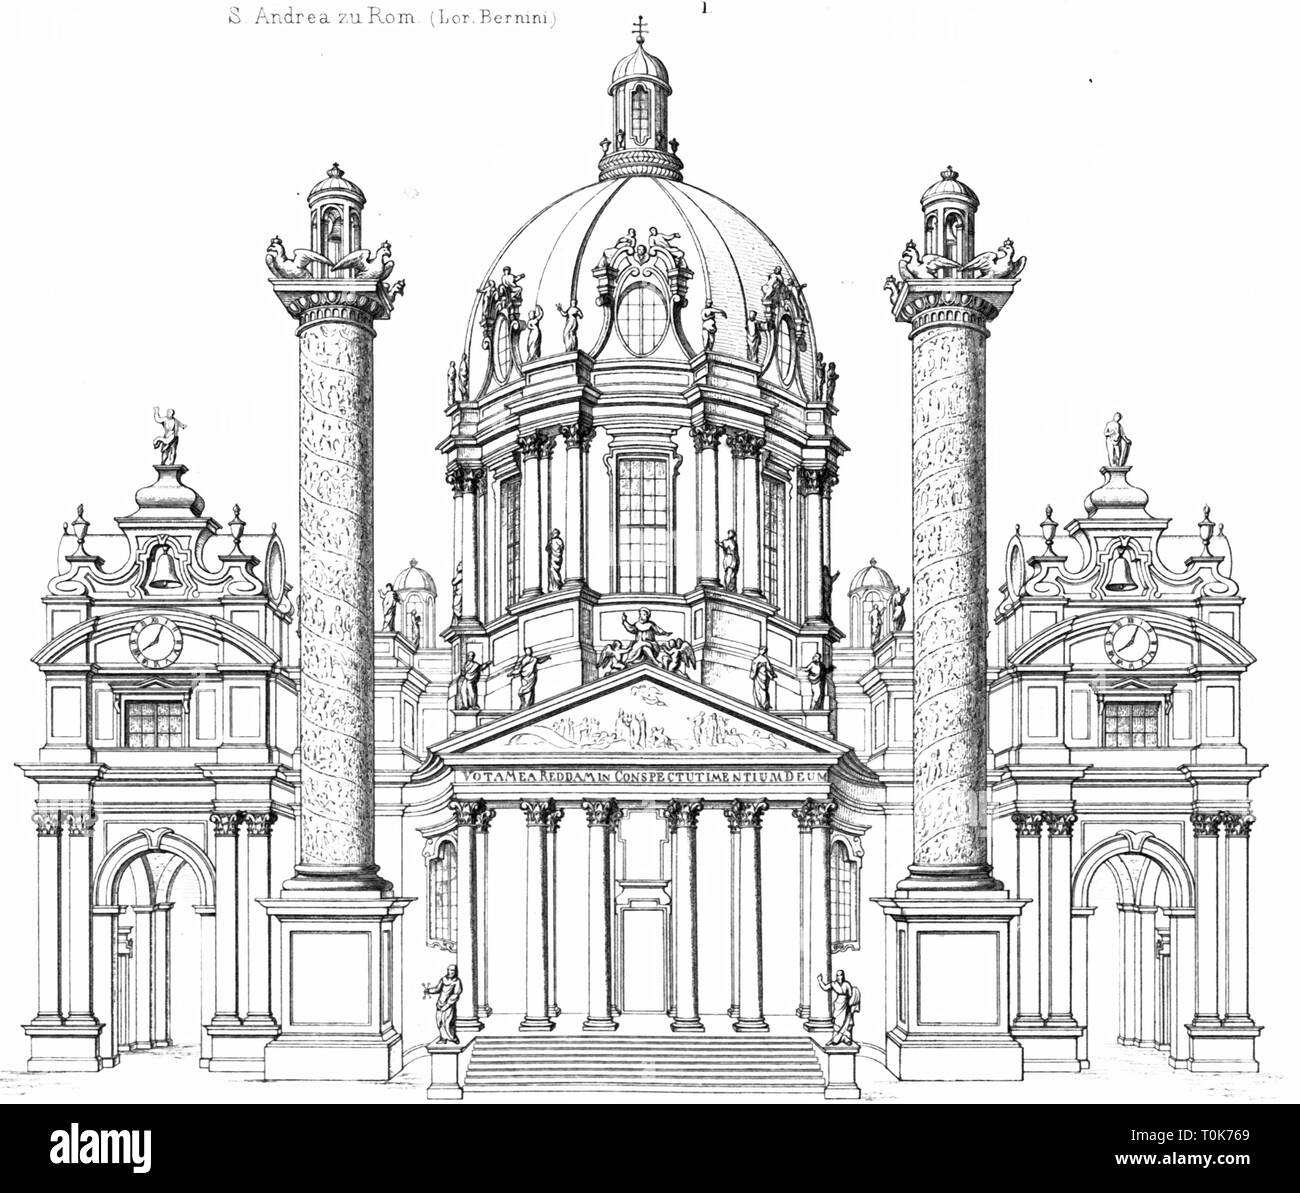 geography / travel, Austria, Vienna, churches, St. Charles's Church (Karlskirche), built: 1716 - 1737, architect: Johann Bernhard Fischer von Erlach, illustration from 'Denkmaeler der Kunst' (Monuments of Art), by Wilhelm Luebke and Carl von Luetzow, 3rd edition, Stuttgart 1879, volume 2, steel engraving by H. Gugeler, after drawing by Wilhelm Riefstahl, chapter on architecture, plate XLIX, Central Europe, churches, architecture, 17th century, church, baroque, sacred, religious, building, buildings, historic, historical, Denkmaler, Denkmäler, Lüb, Additional-Rights-Clearance-Info-Not-Available Stock Photo